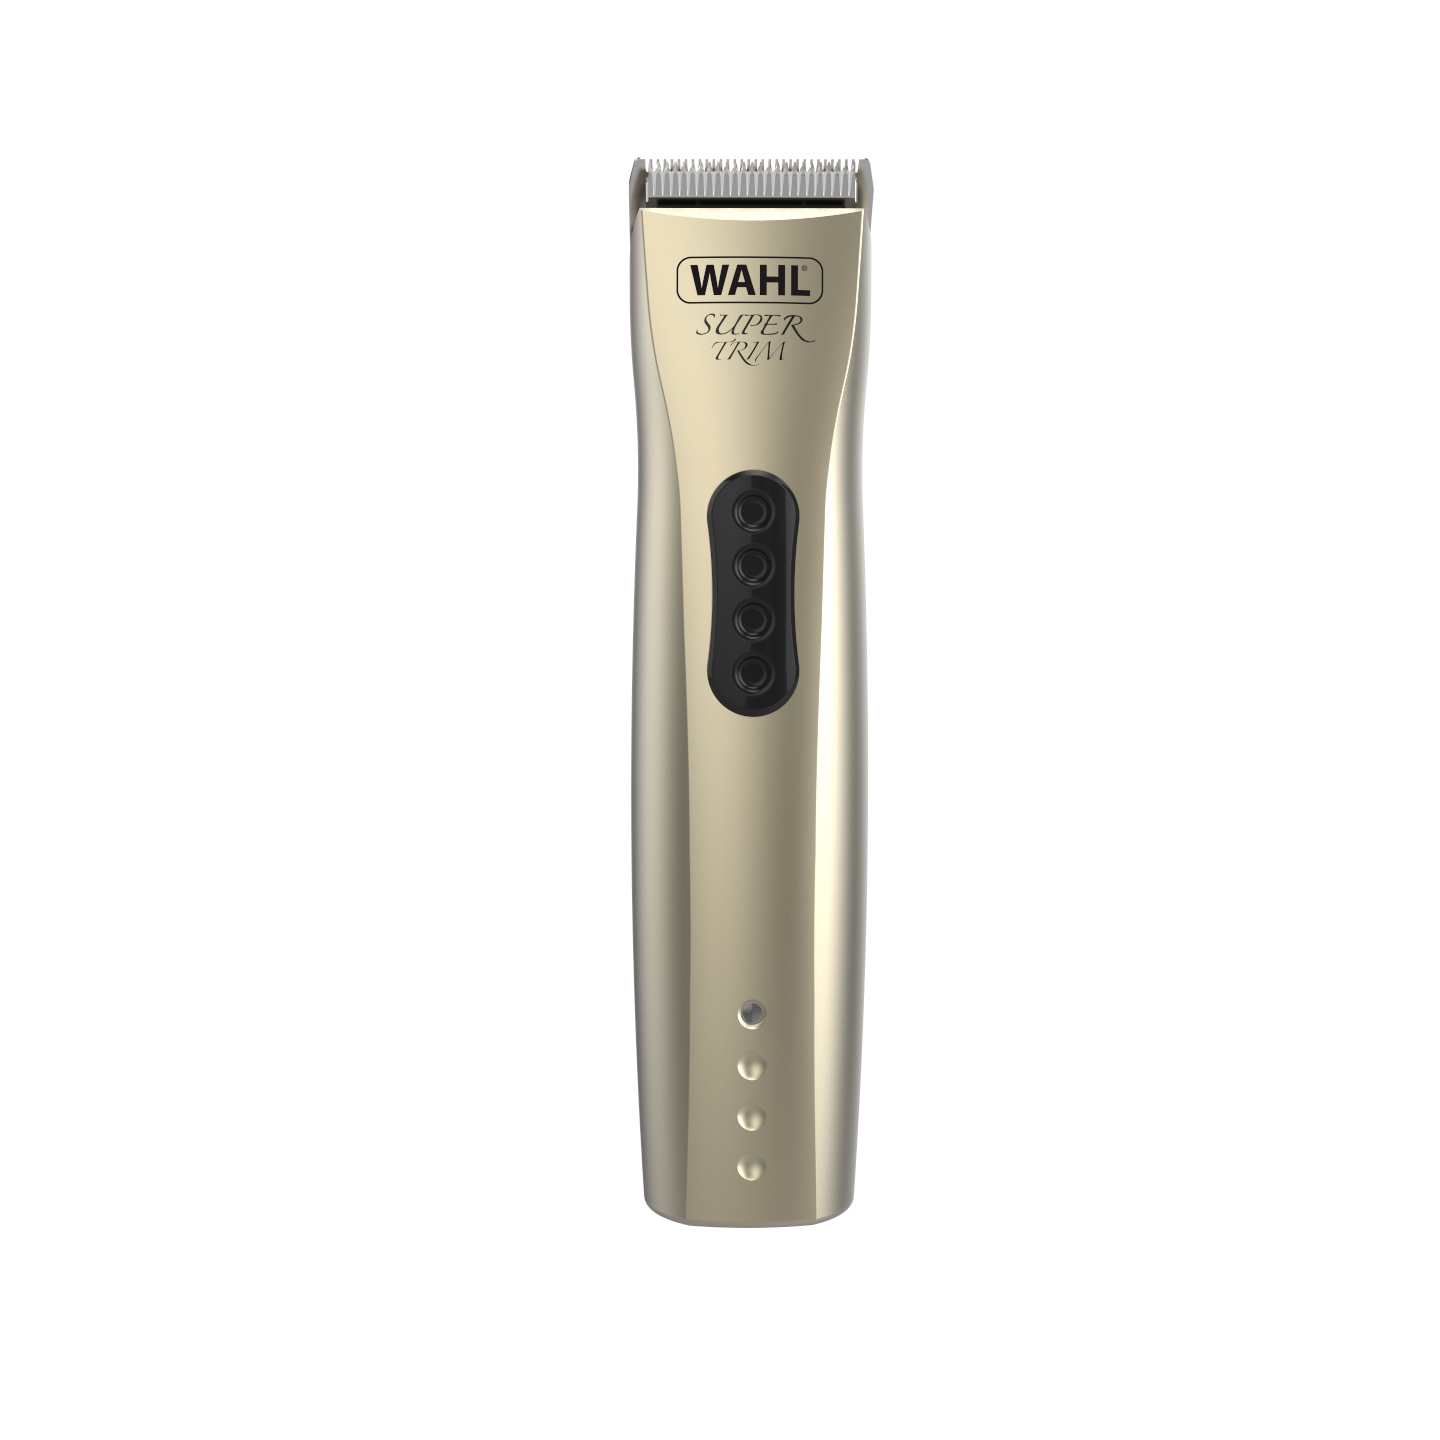 wahl dog clippers uk